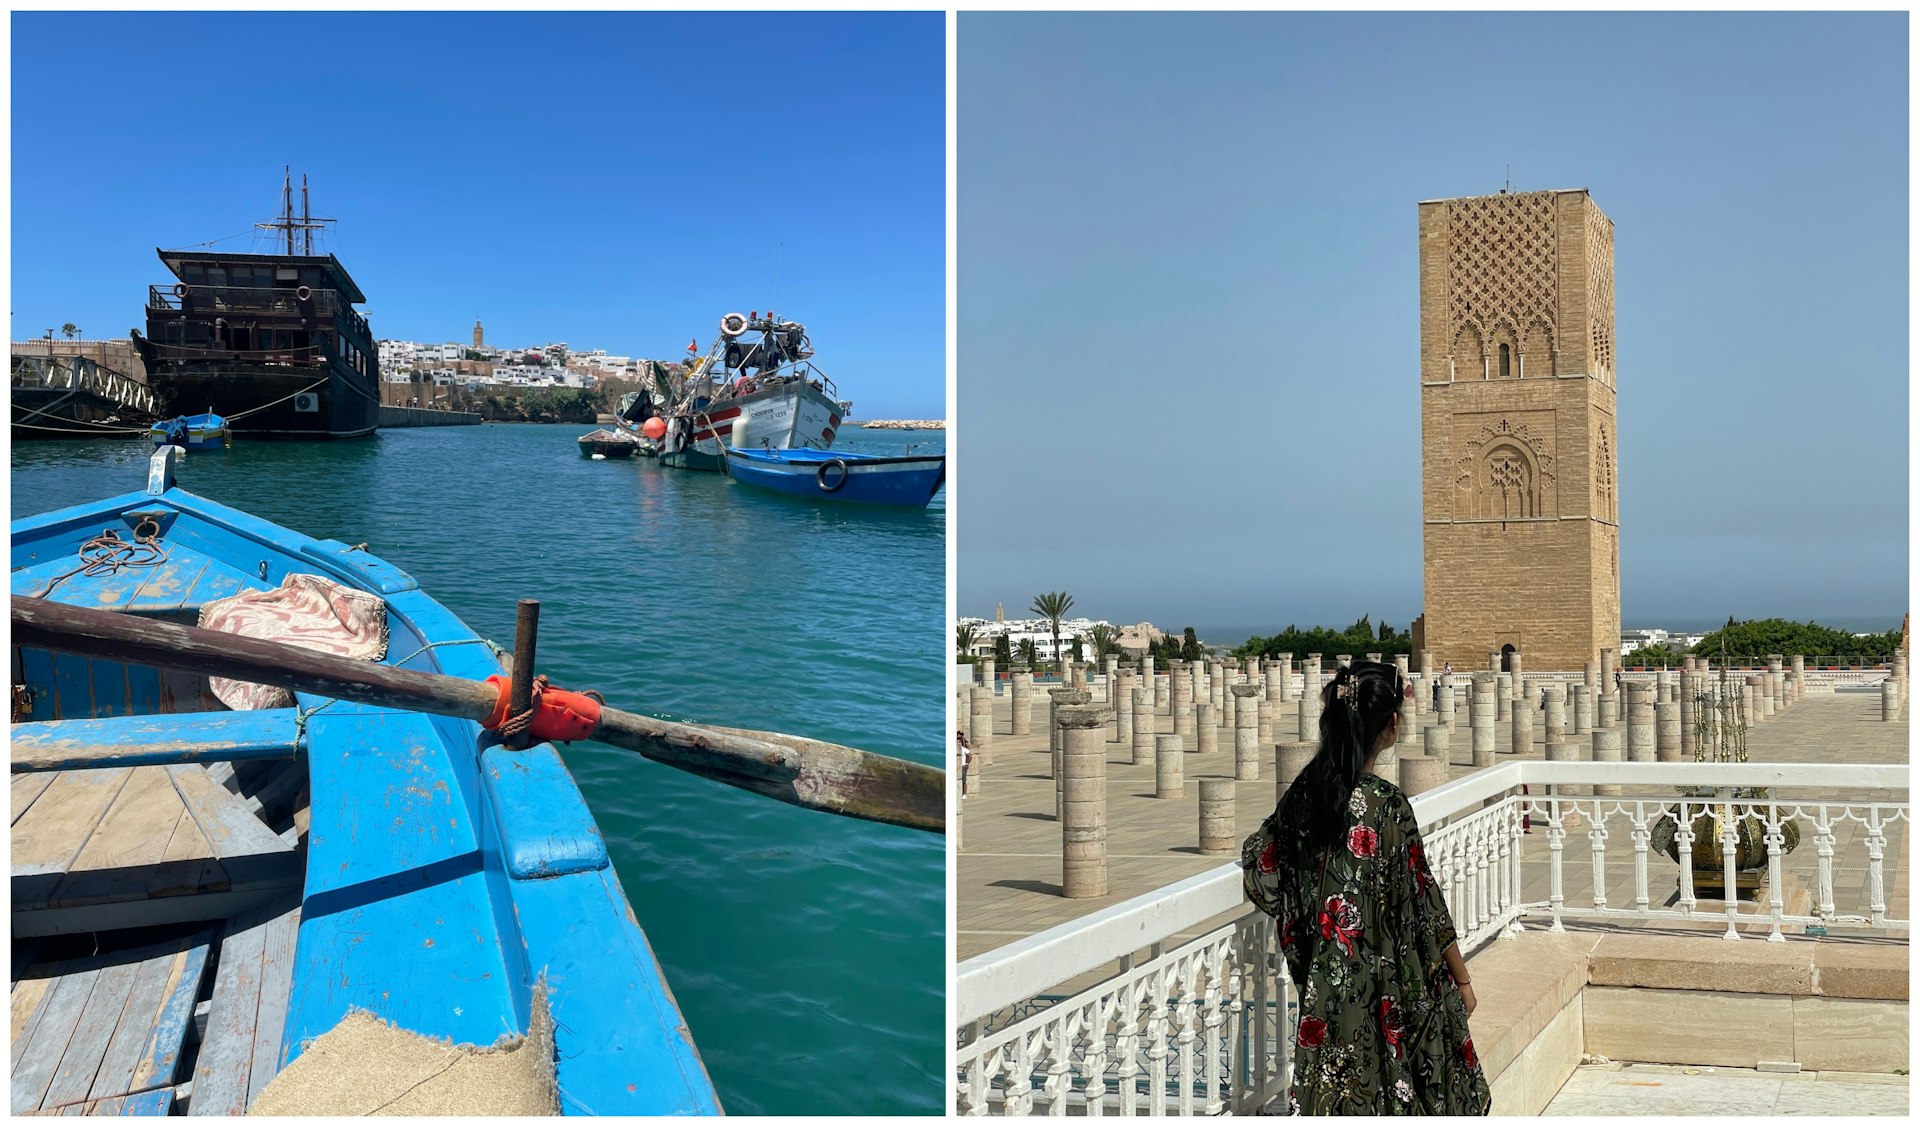 L: Deepa steers a canoe touring Bou Regreg. R: Deepa poses on a terrace of the Hassan Tower in Rabat